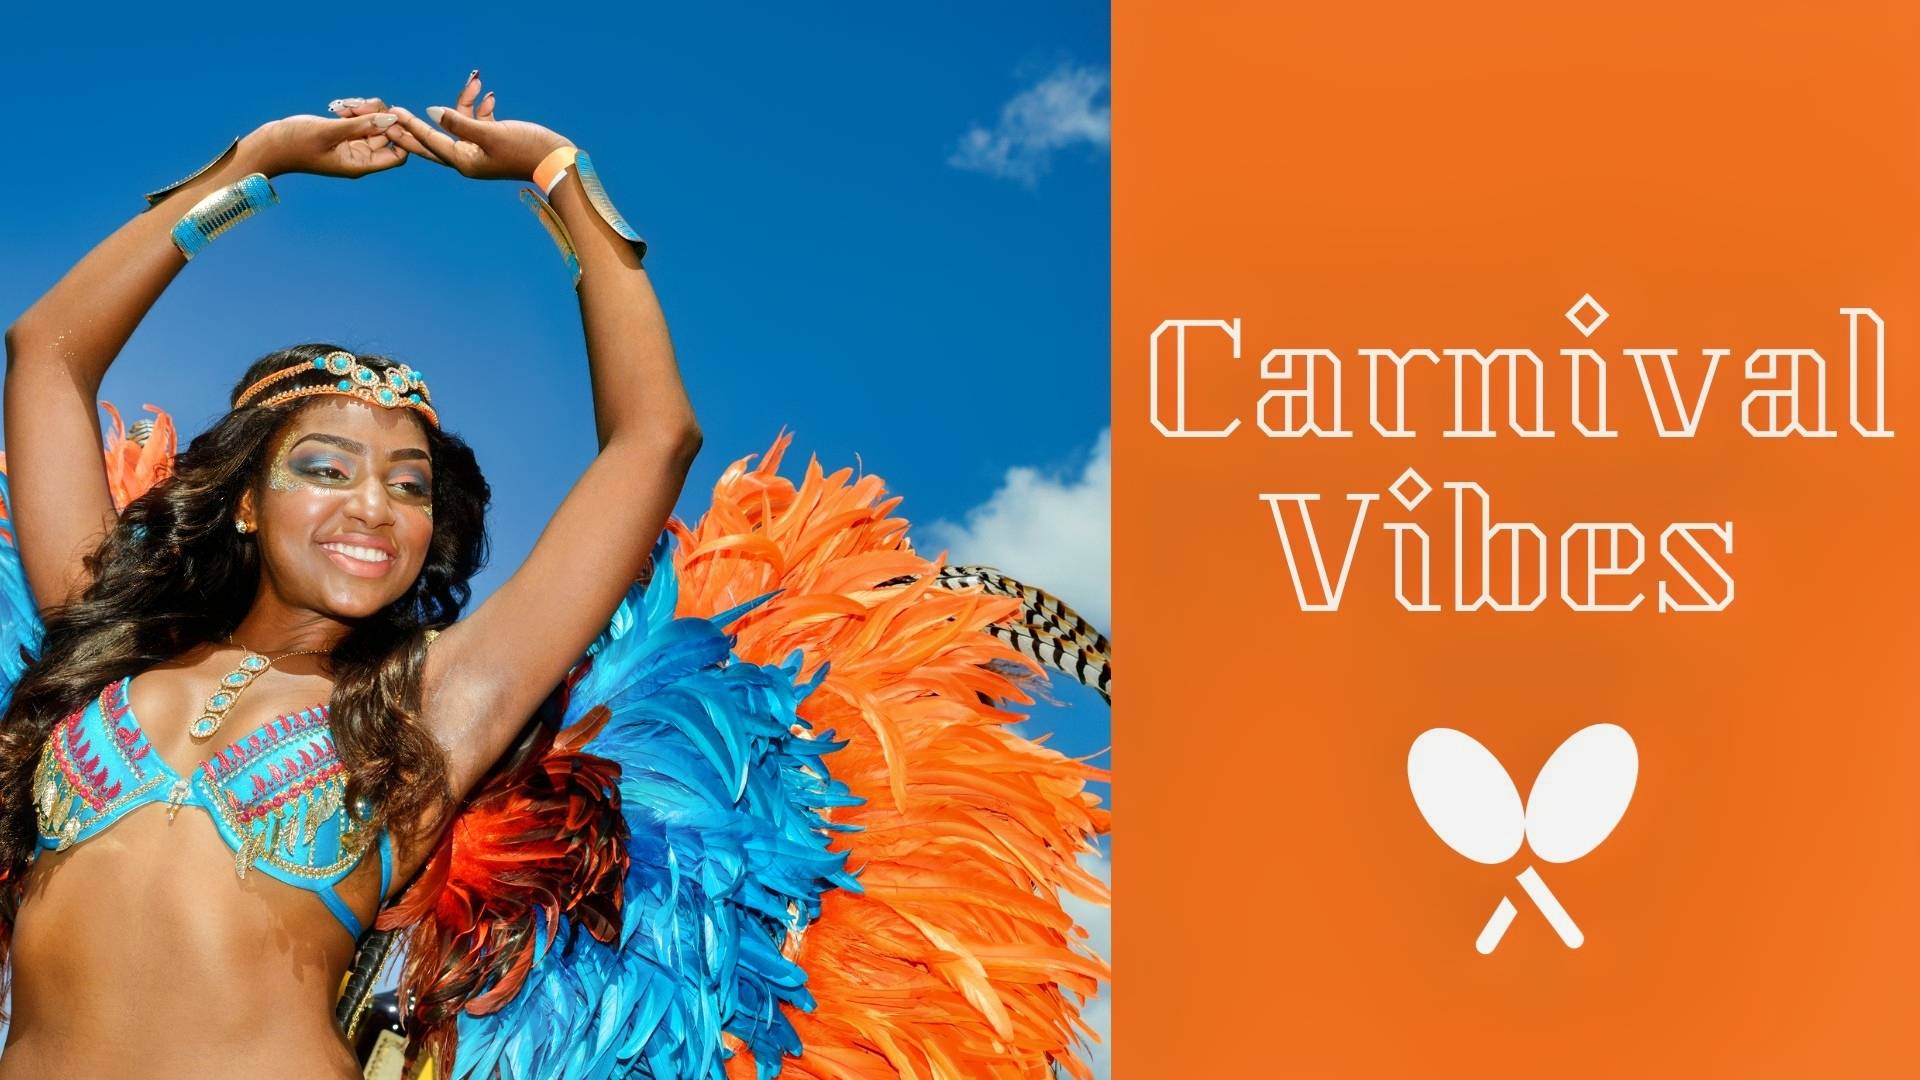 The history of Brooklyn's Caribbean Carnival, the most colorful